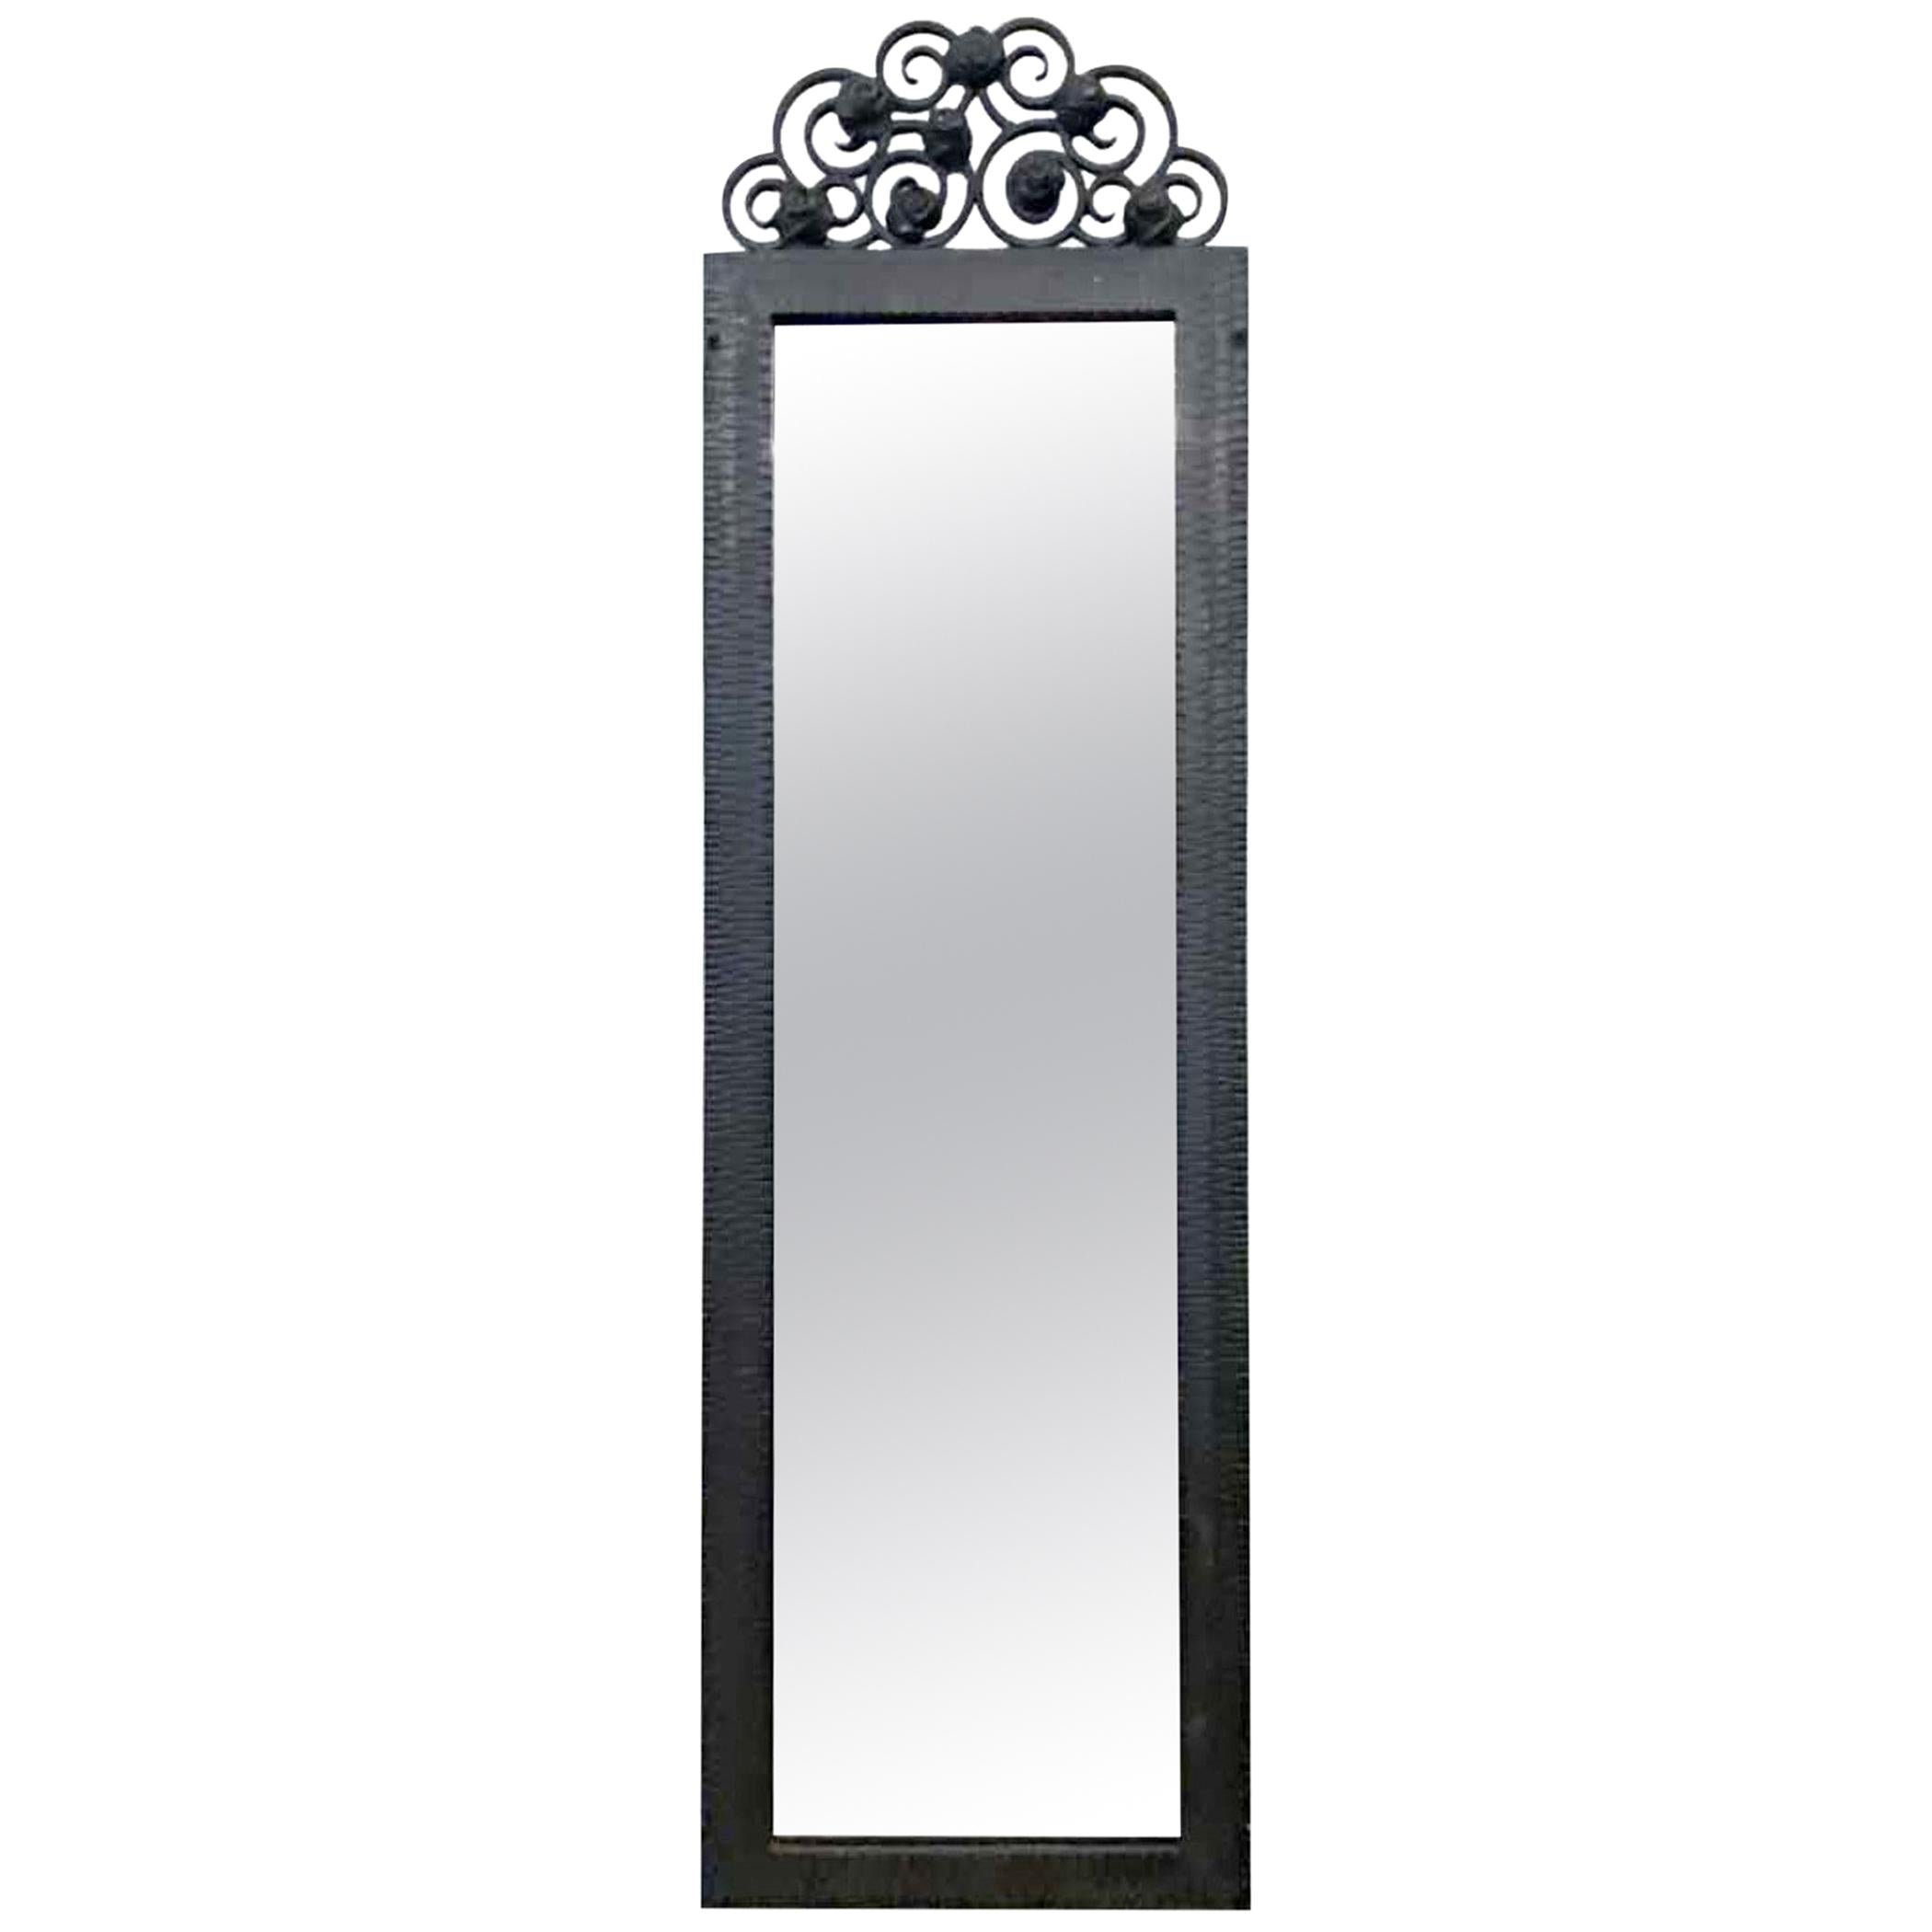 1930s French Art Deco Iron Mirror with Beveled Glass, Floral Top Design